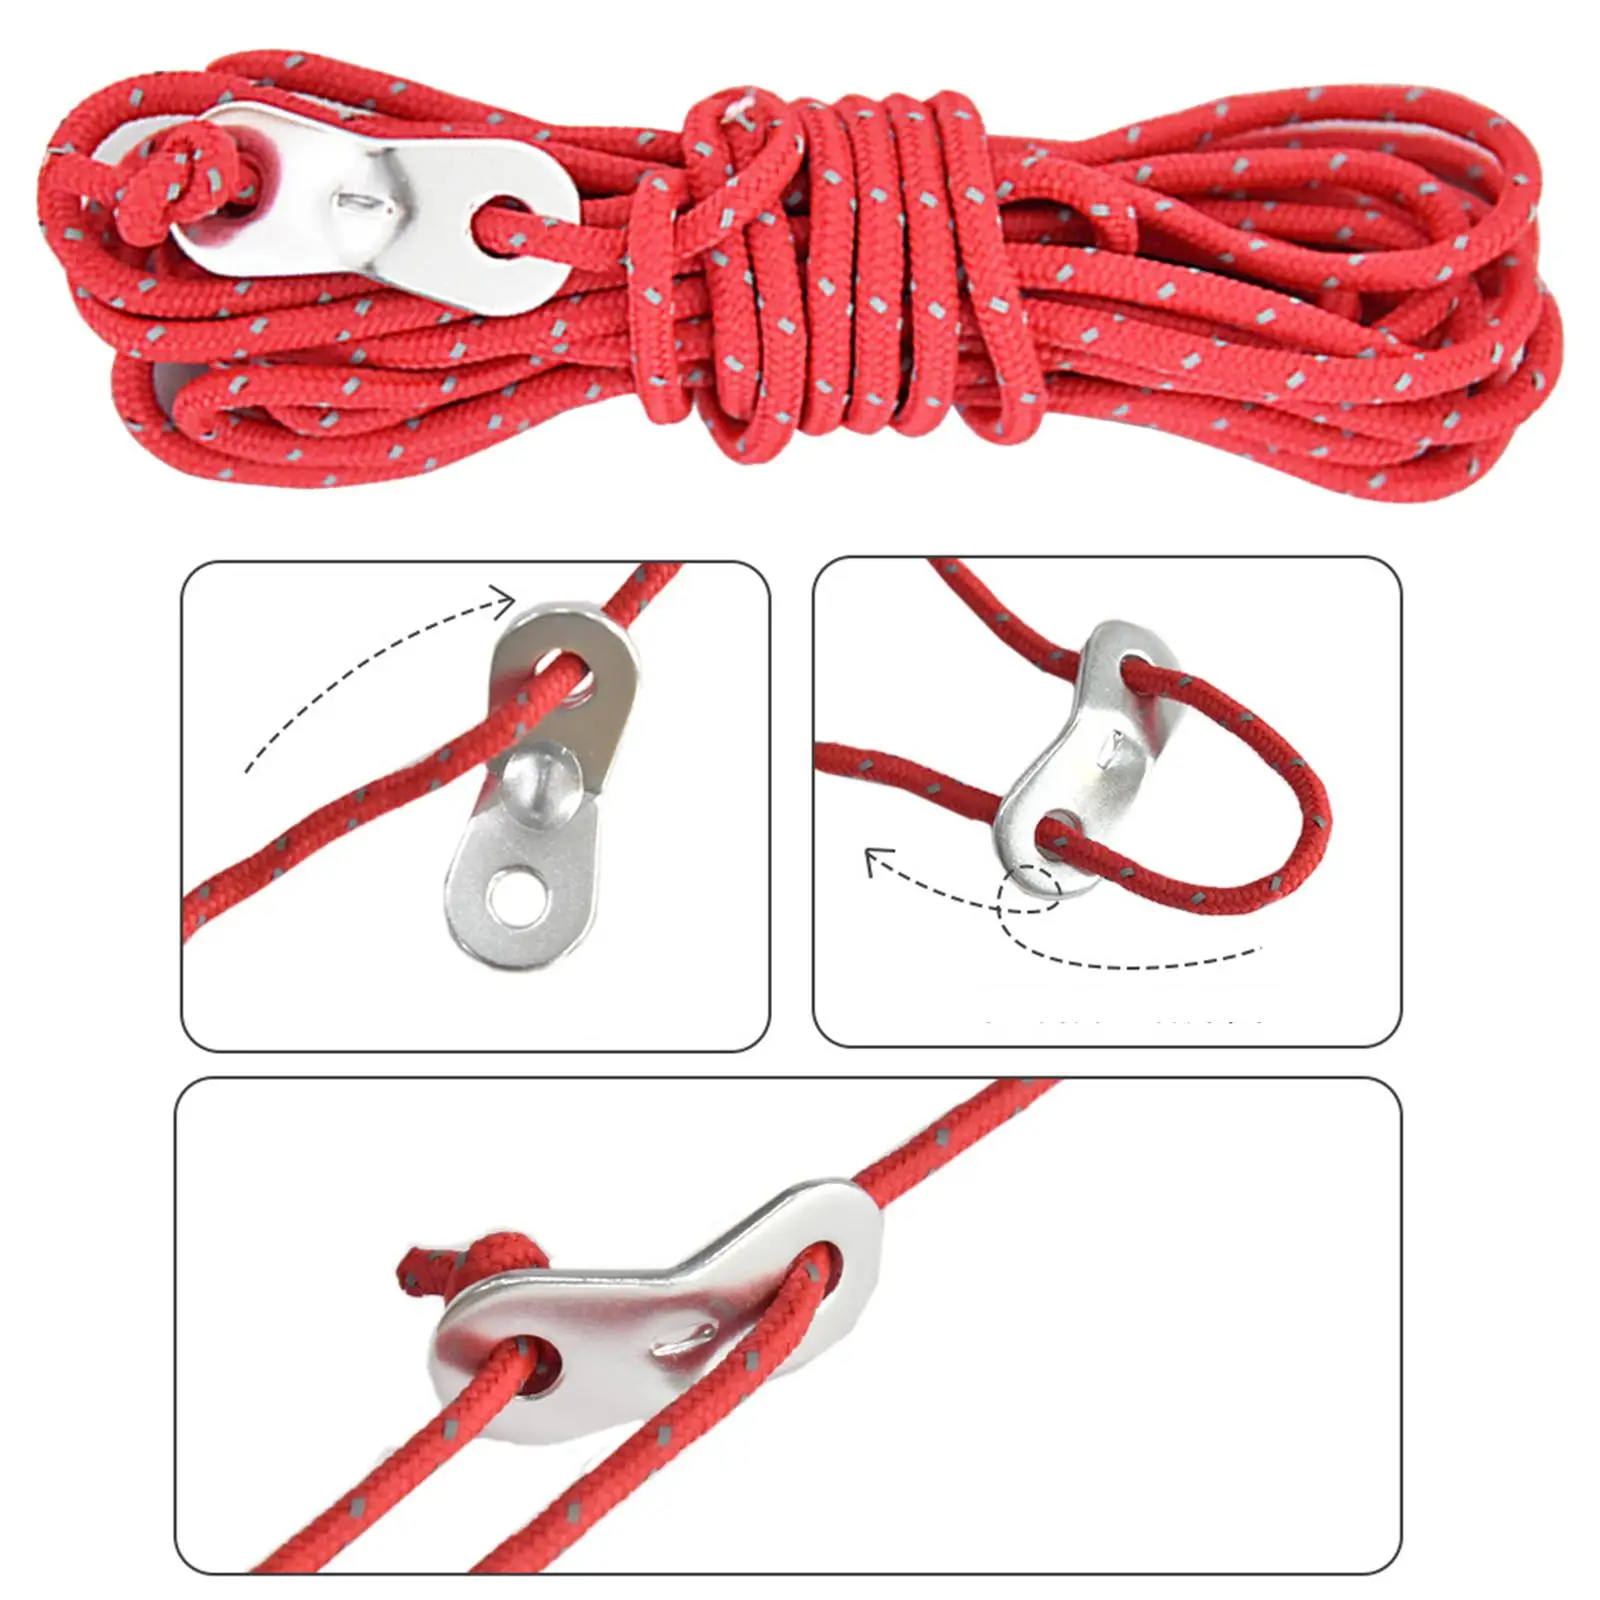 2x Windproof Wind Rope with Adjustment Buckle Accs Loose for Camping Tent Survival